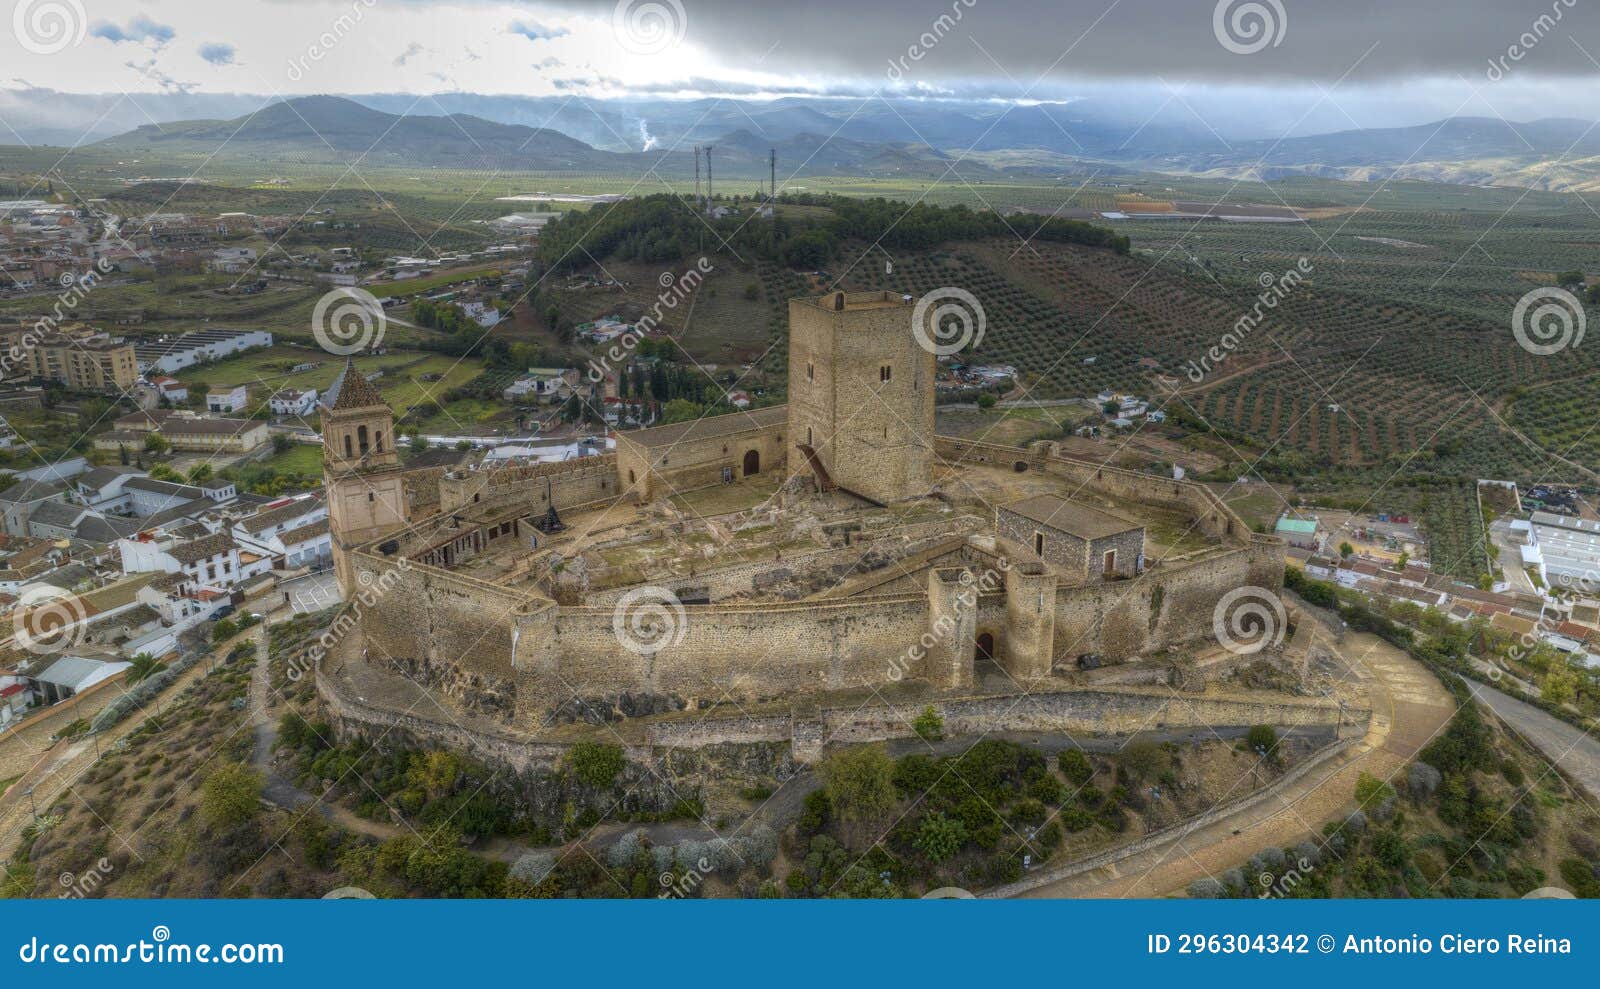 aerial view of the castle of alcaudete in the province of jaÃ©n, andalusia